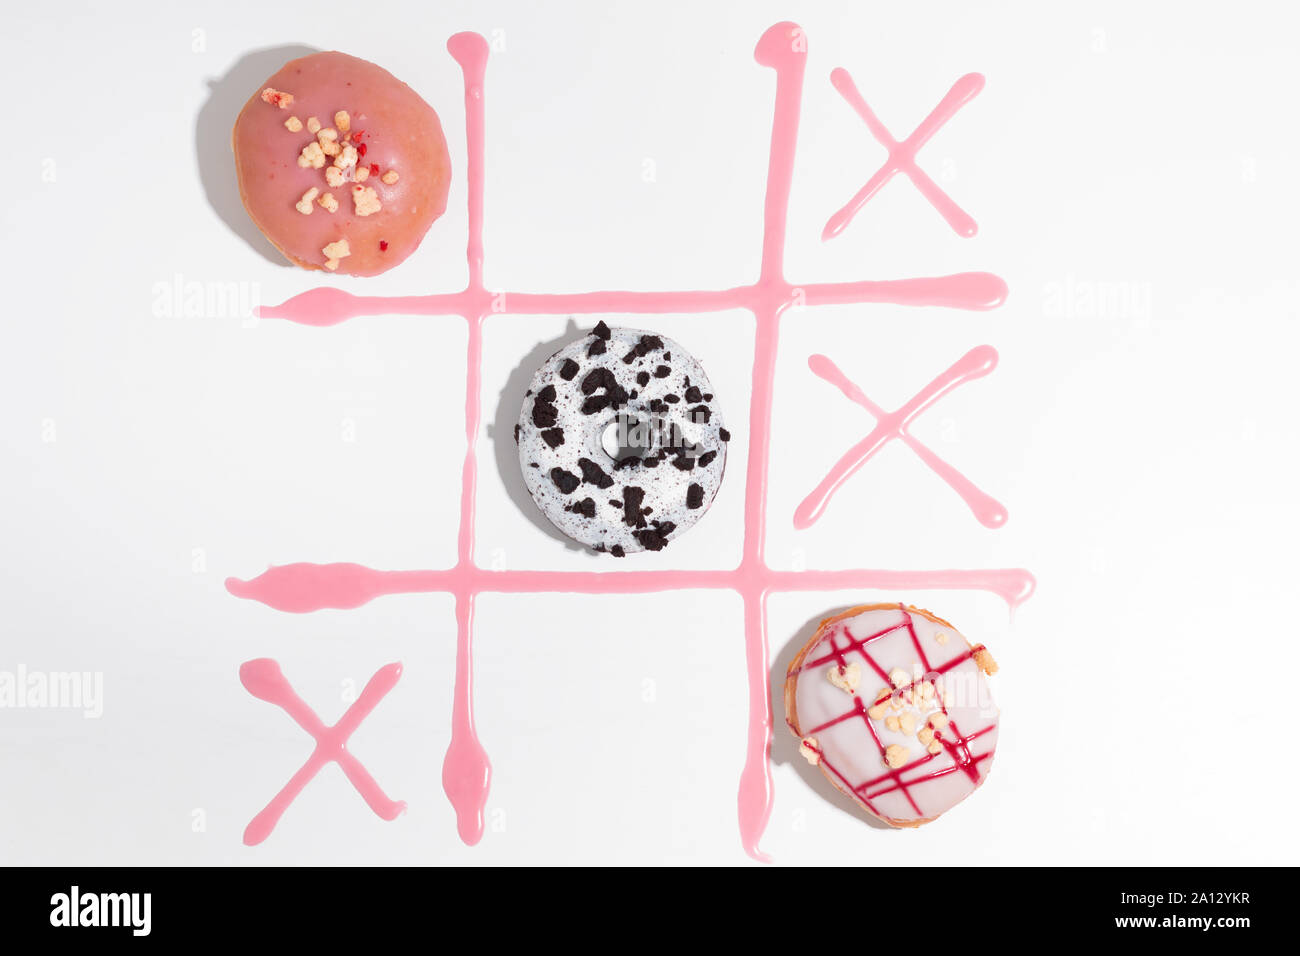 Delicious donuts and pink icing on a white background. Tic-tac-toe concept. Stock Photo